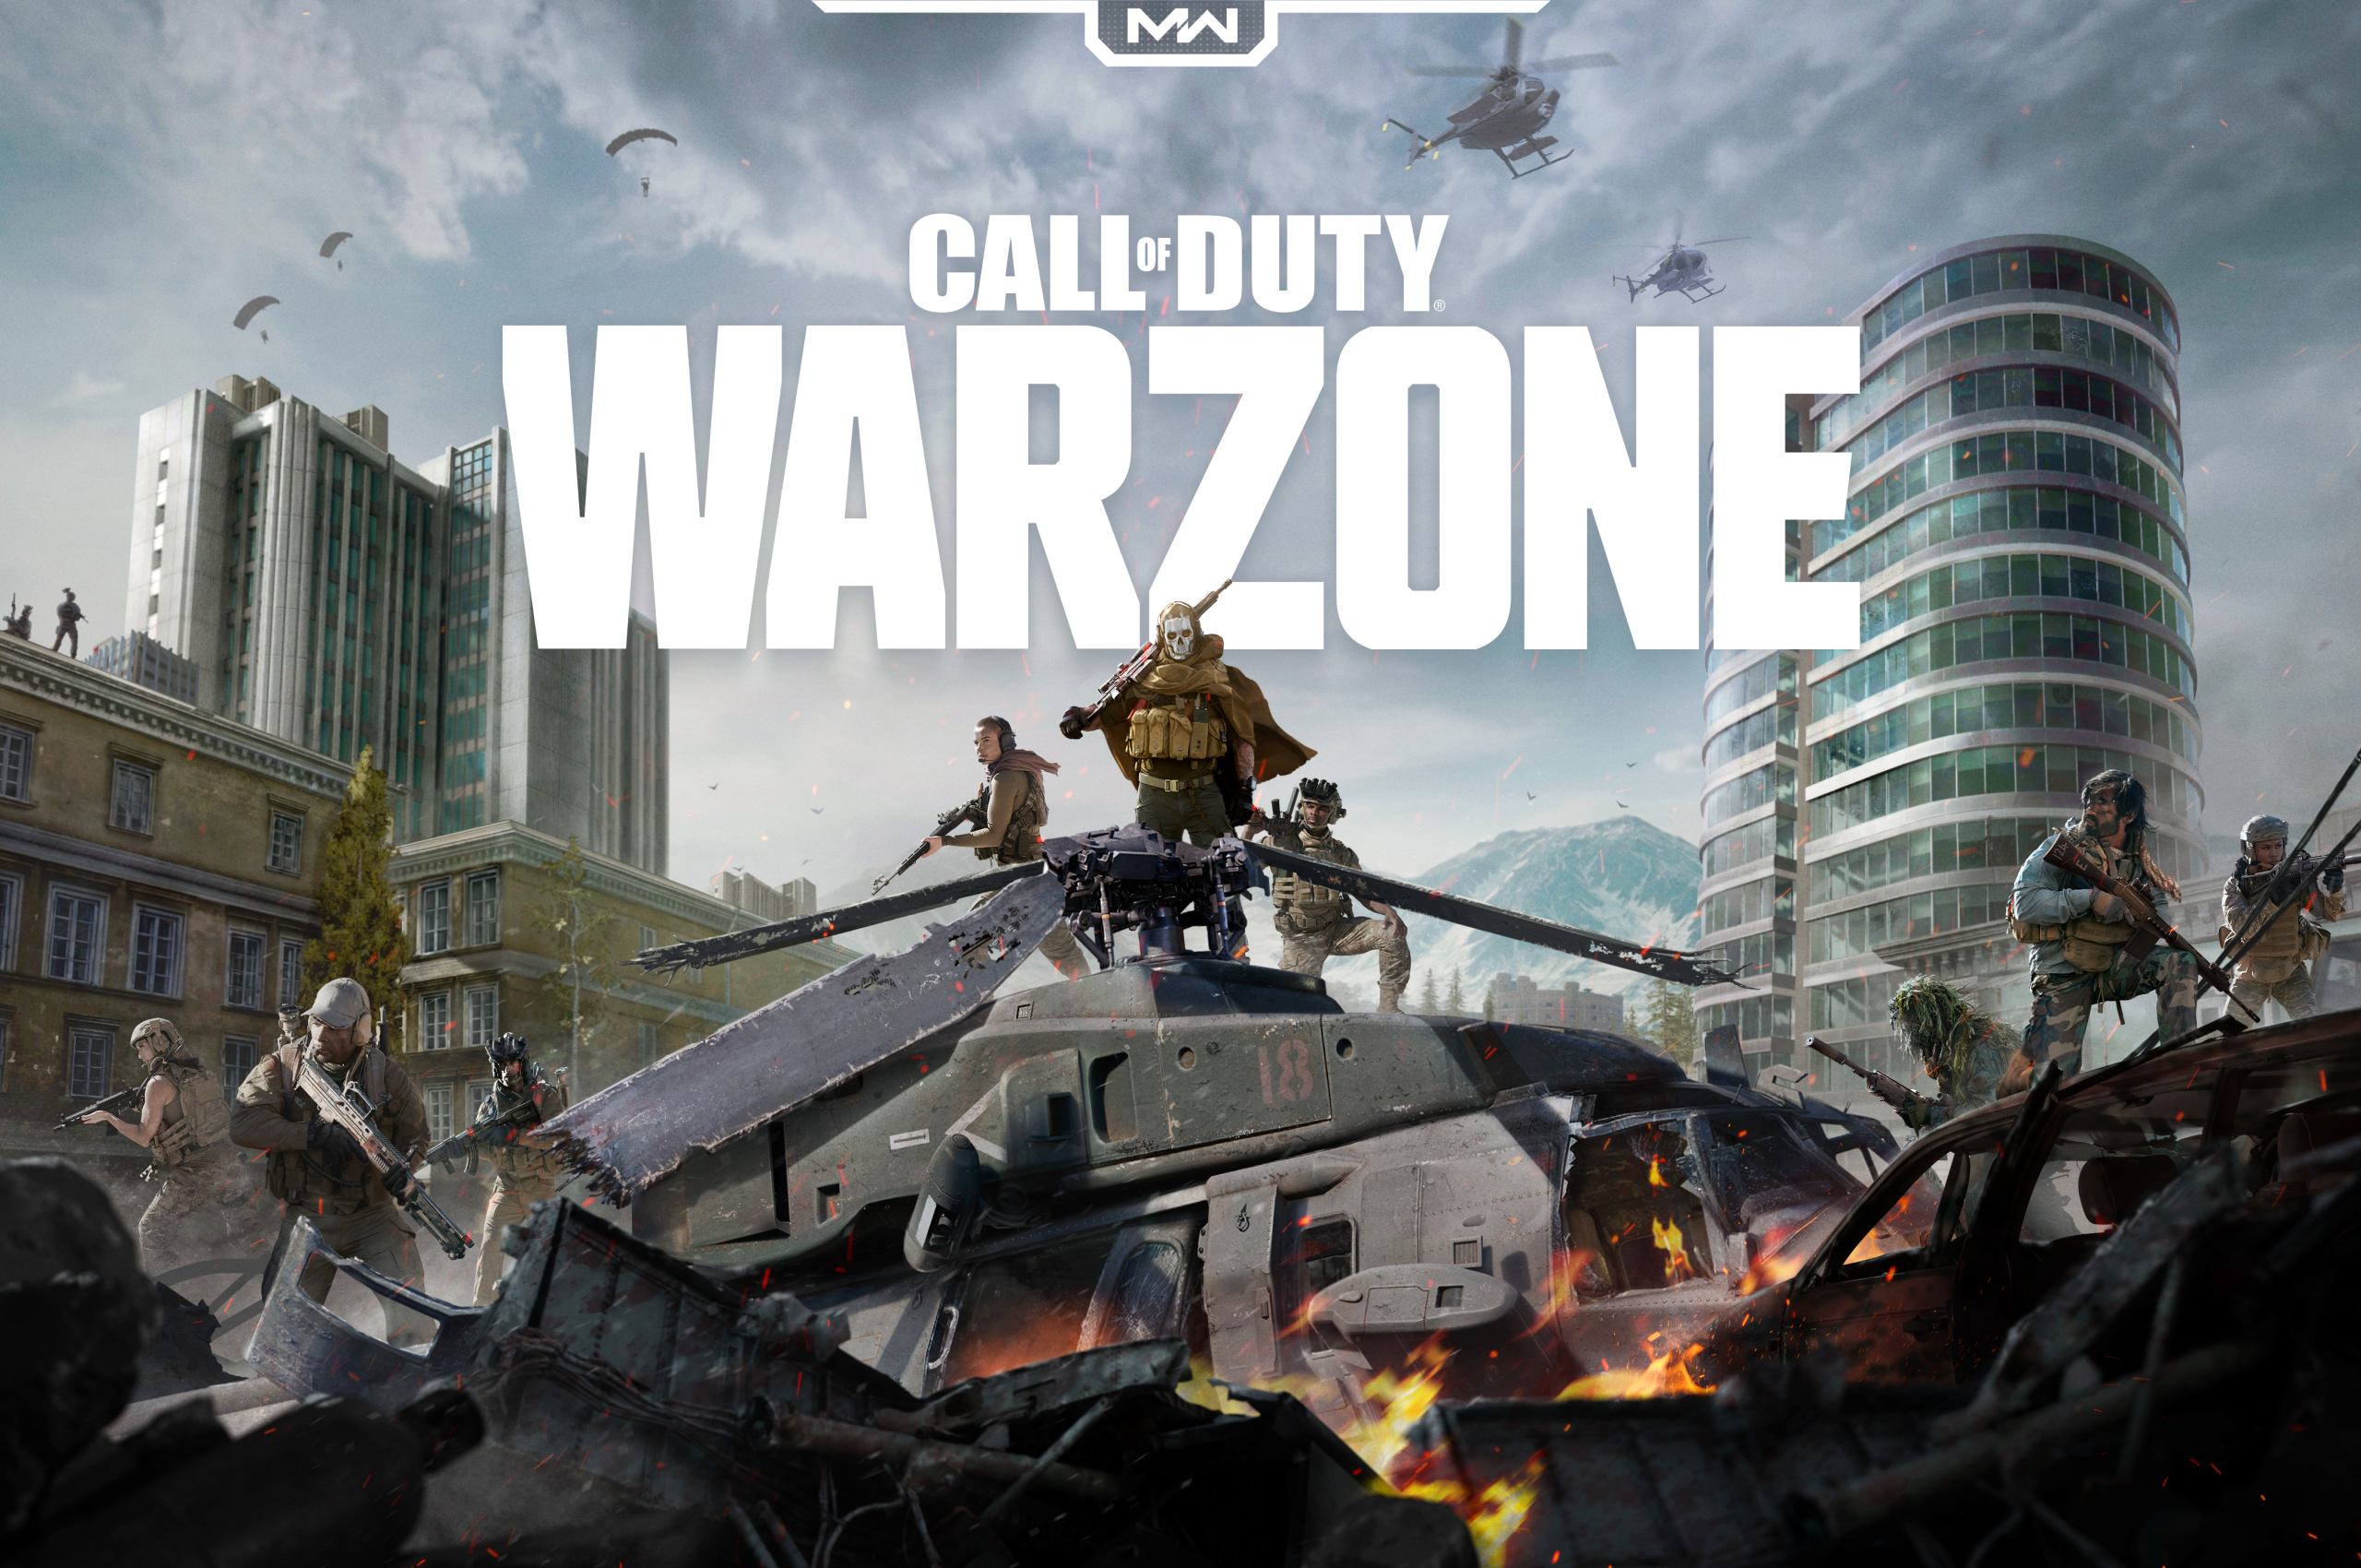 1336x768 Call Of Duty Warzone Poster 4k Hd Laptop Wallpaper, Hd Games A7F